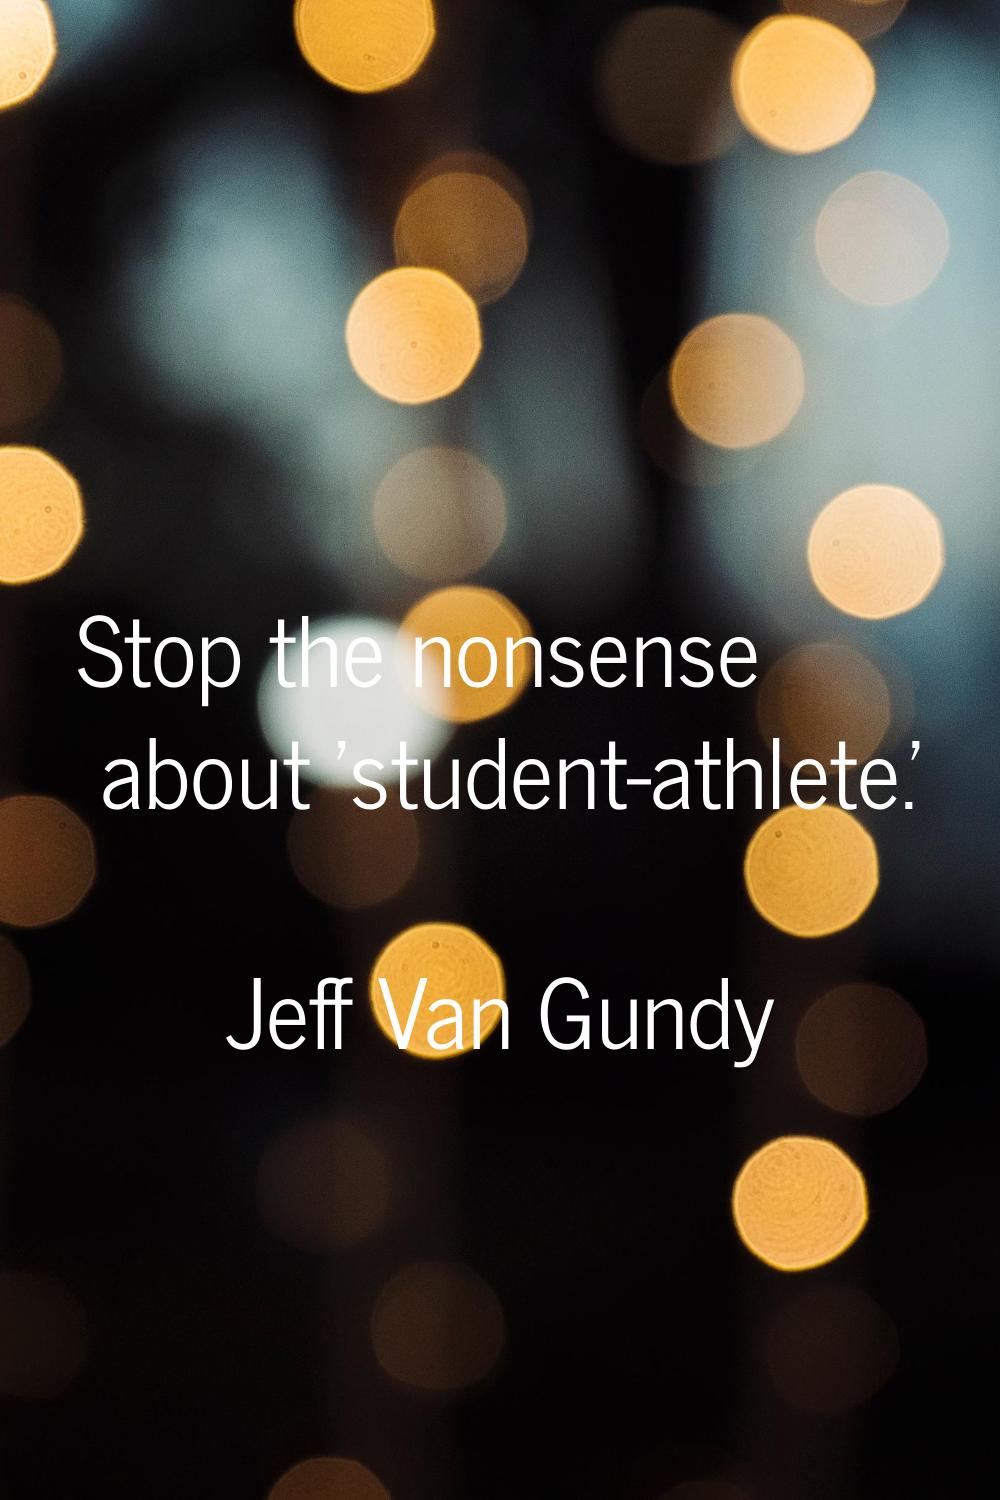 Stop the nonsense about 'student-athlete.'